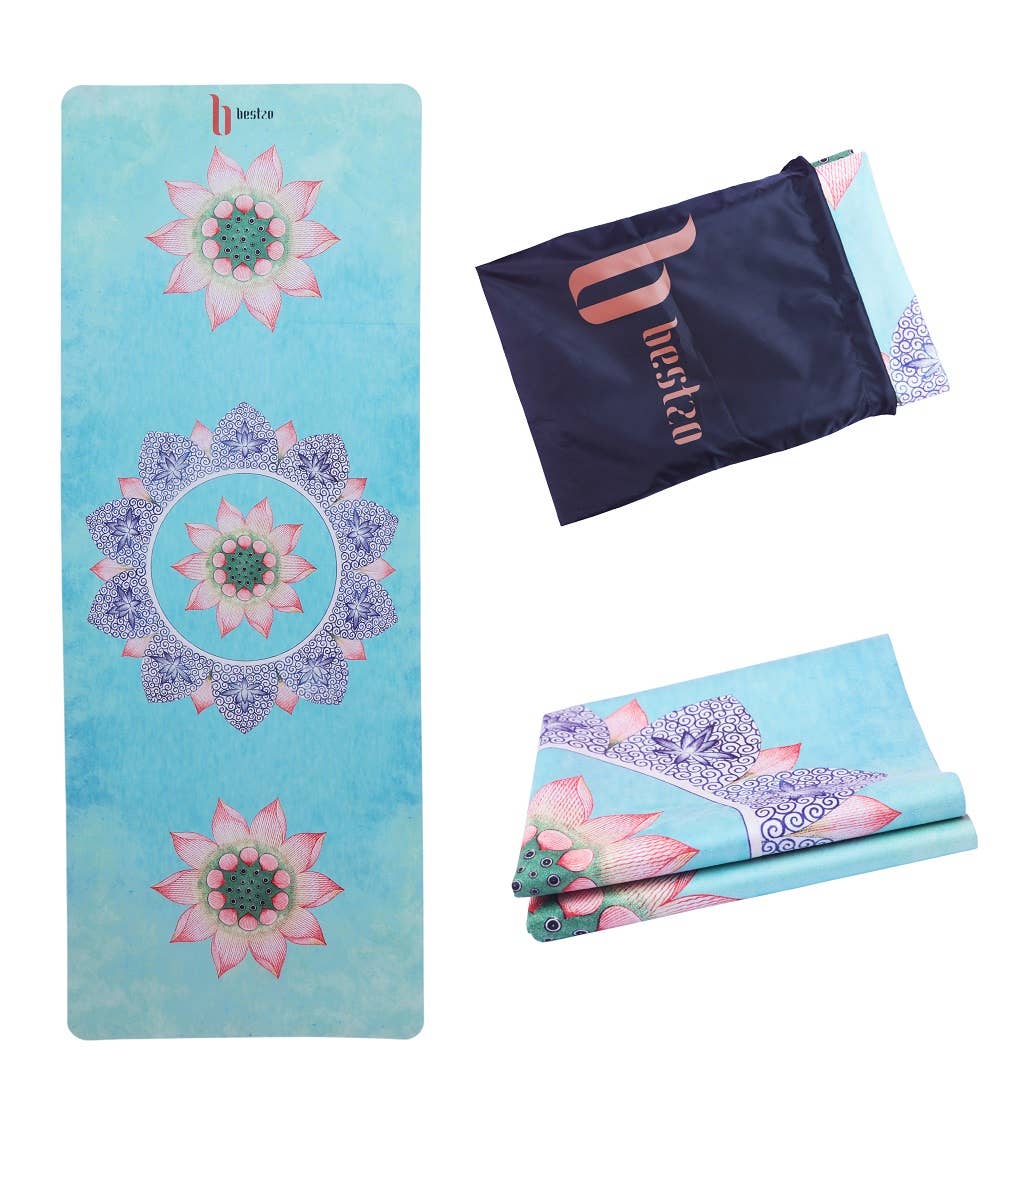 Bestzo HPE Yoga Mat-72x 24 Extra Thick 1/4 Exercise and Workout